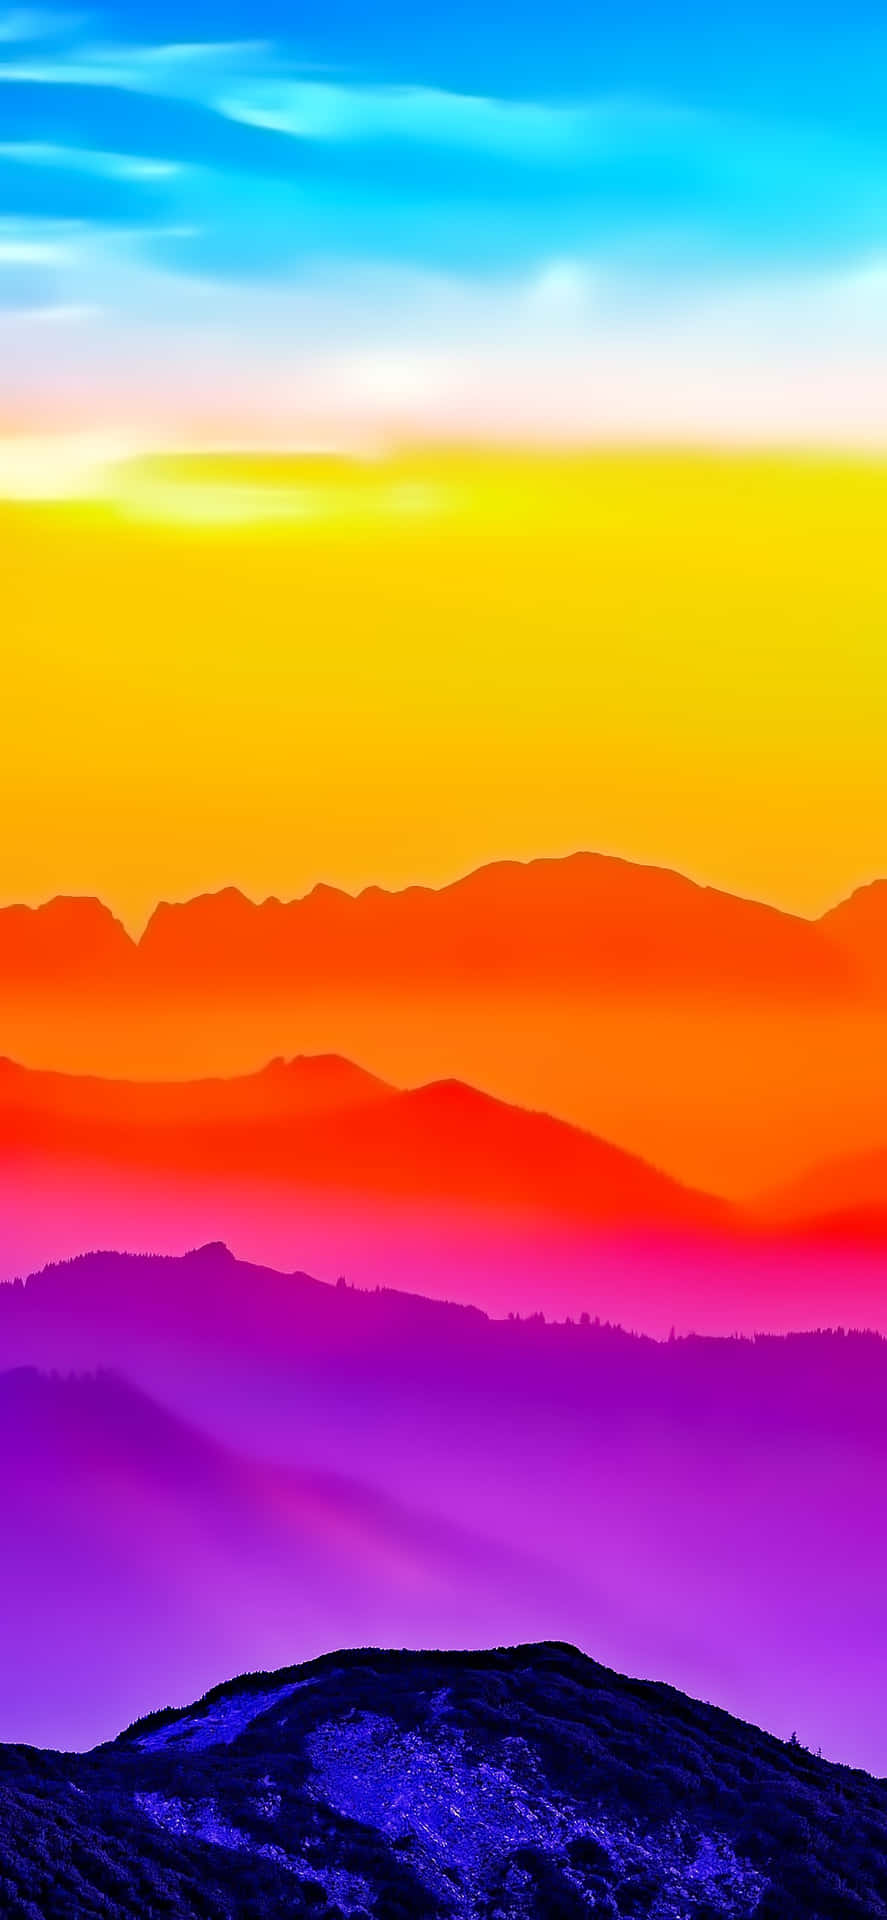 Add A Splash Of Color To Your Life With The Colorful Iphone Background